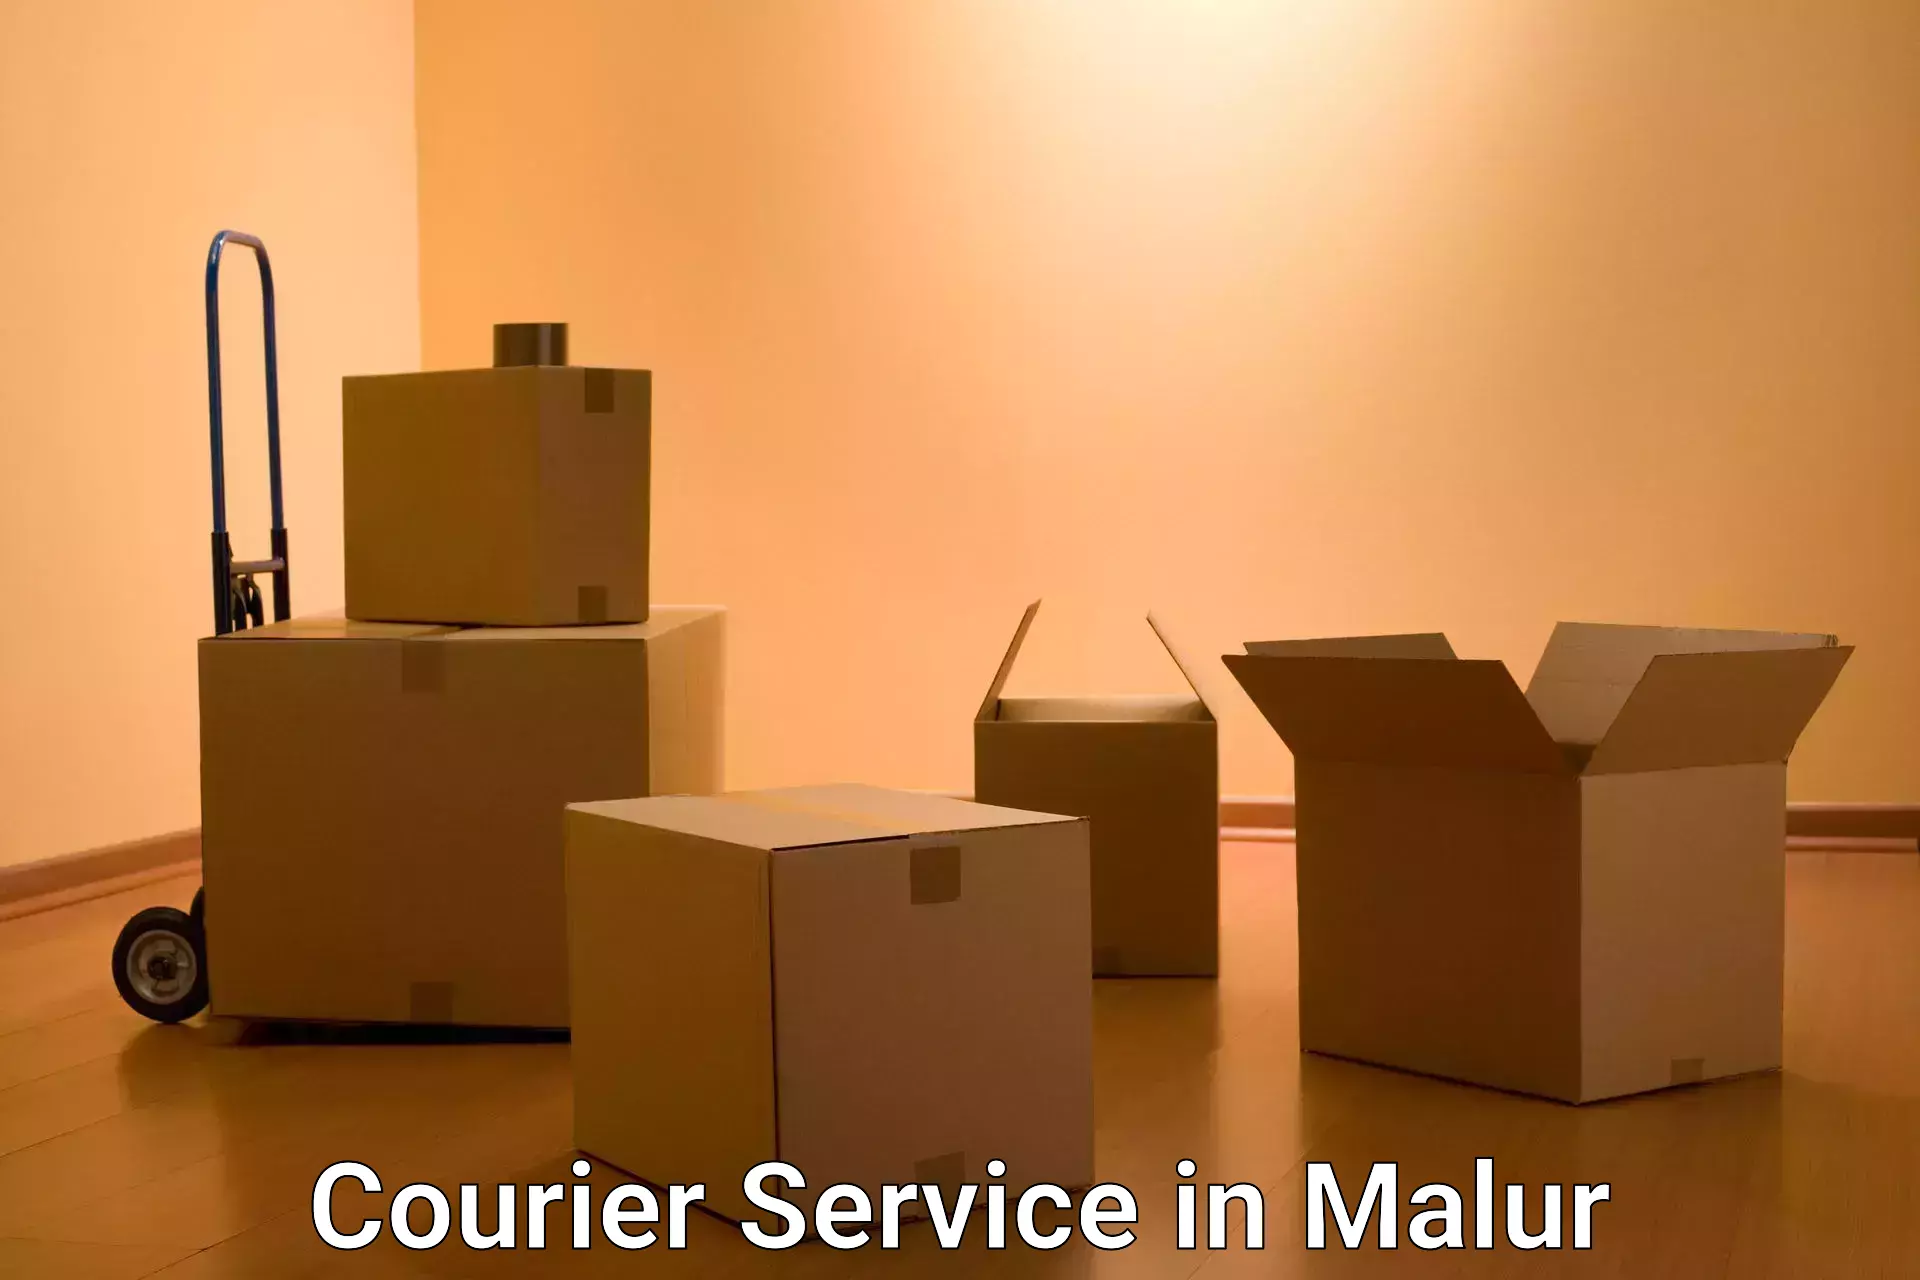 24-hour courier service in Malur